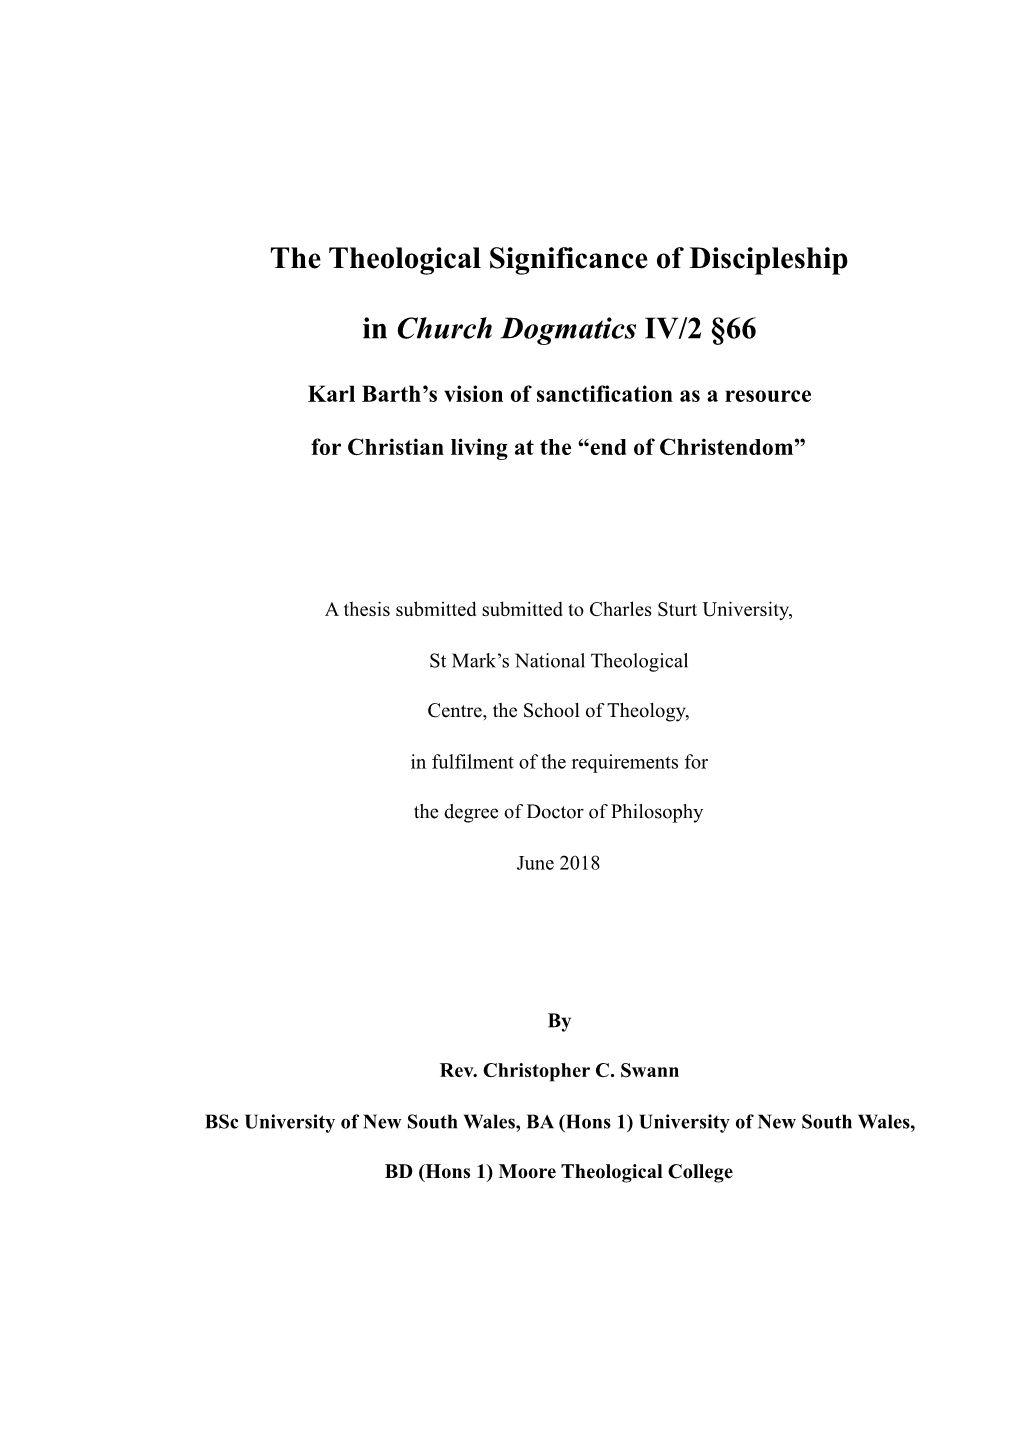 The Theological Significance of Discipleship in Church Dogmatics